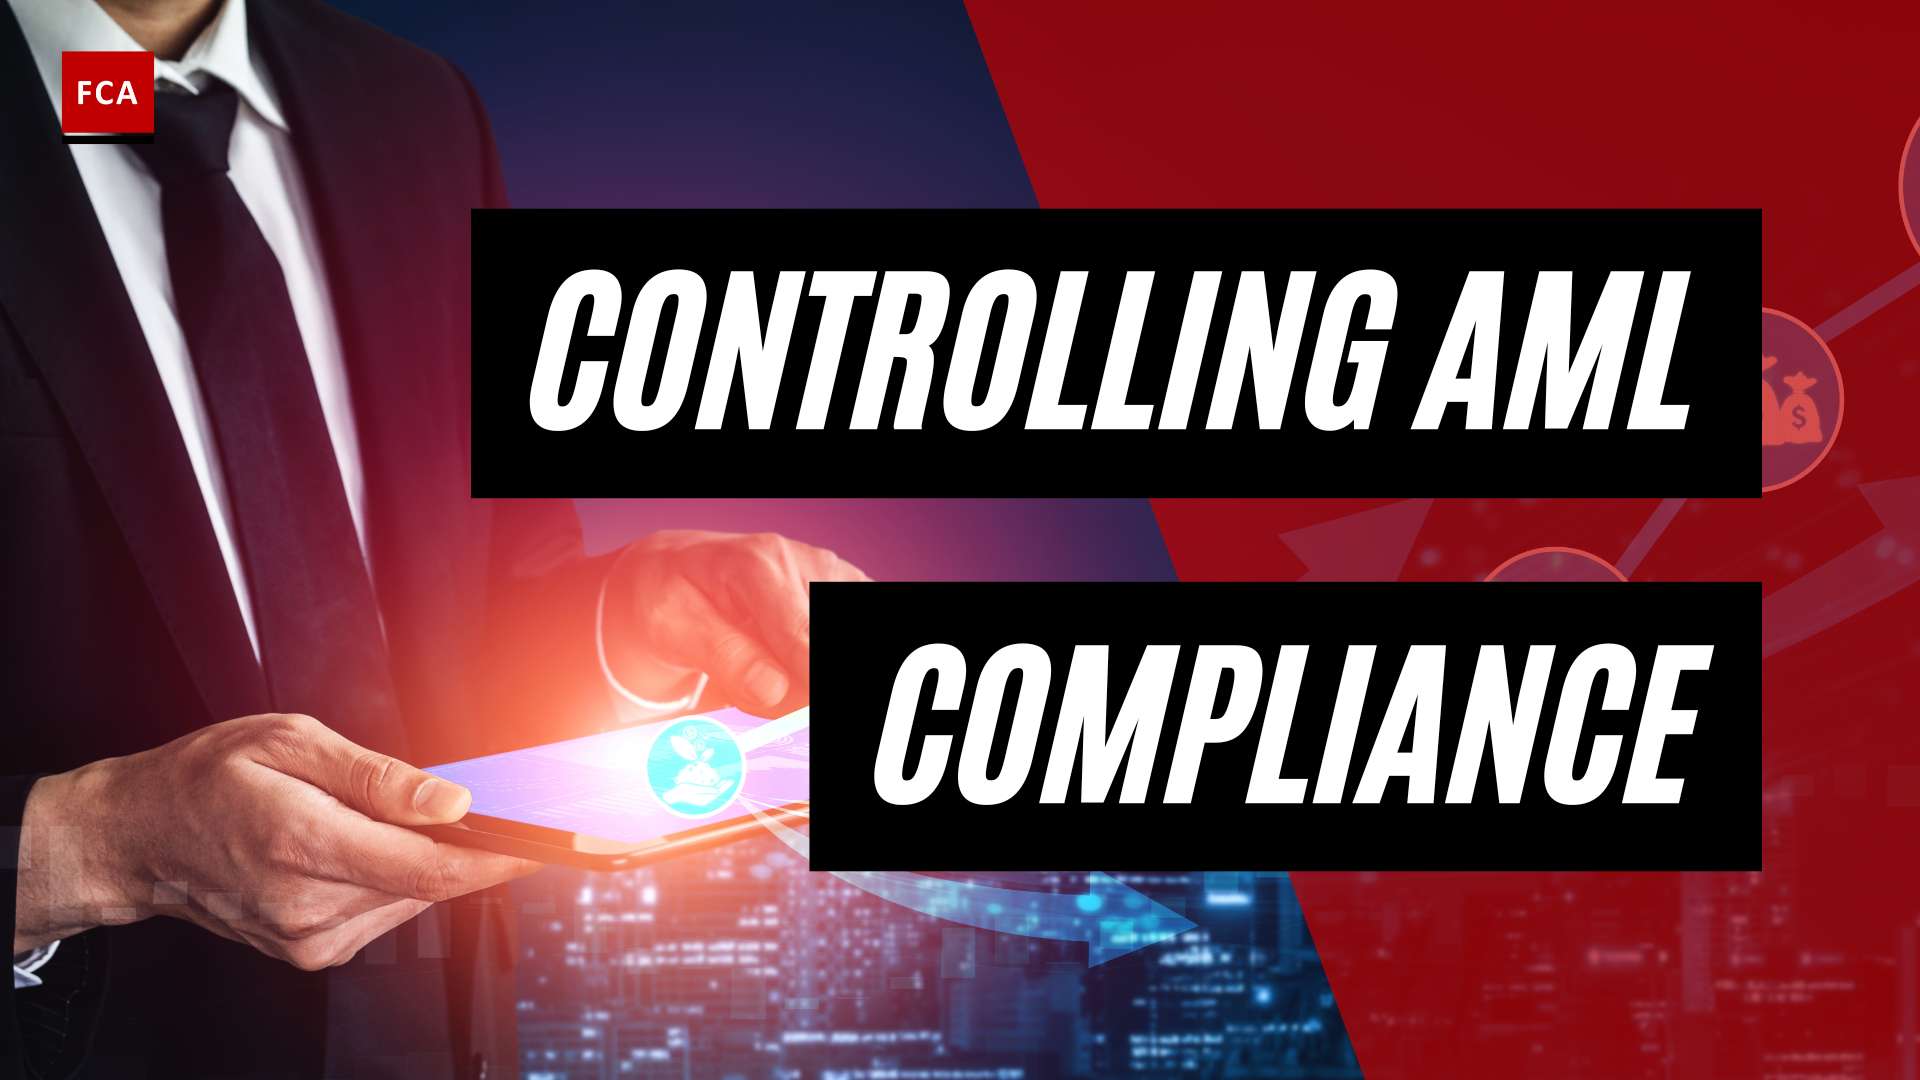 Taking Control Of Aml Compliance: The Ultimate Guide To Aml Compliance Software